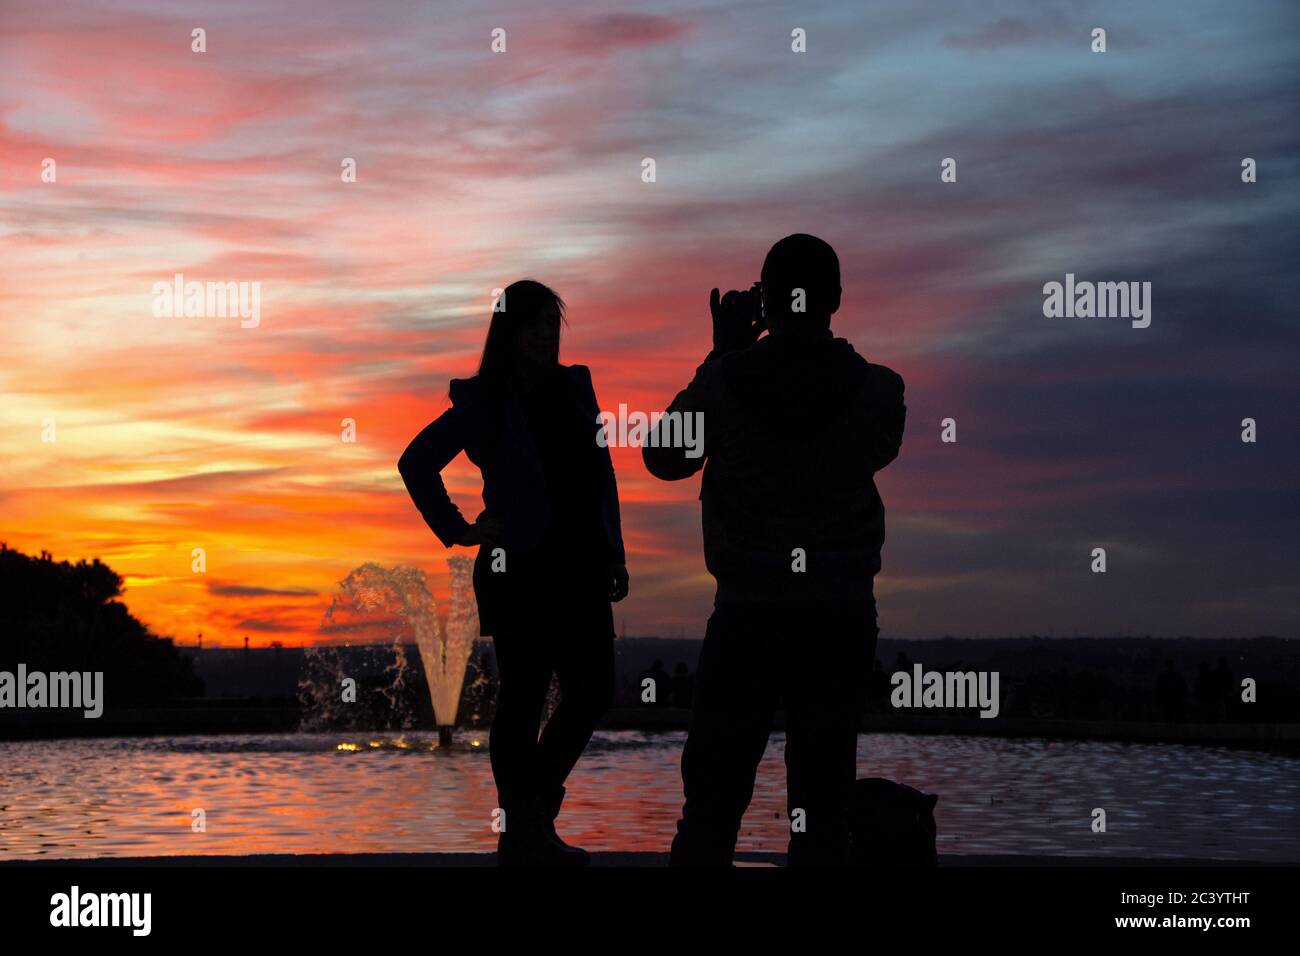 silhouette of a man holding a cellphone taking pictures outside during sunrise or sunset. Madrid. Stock Photo